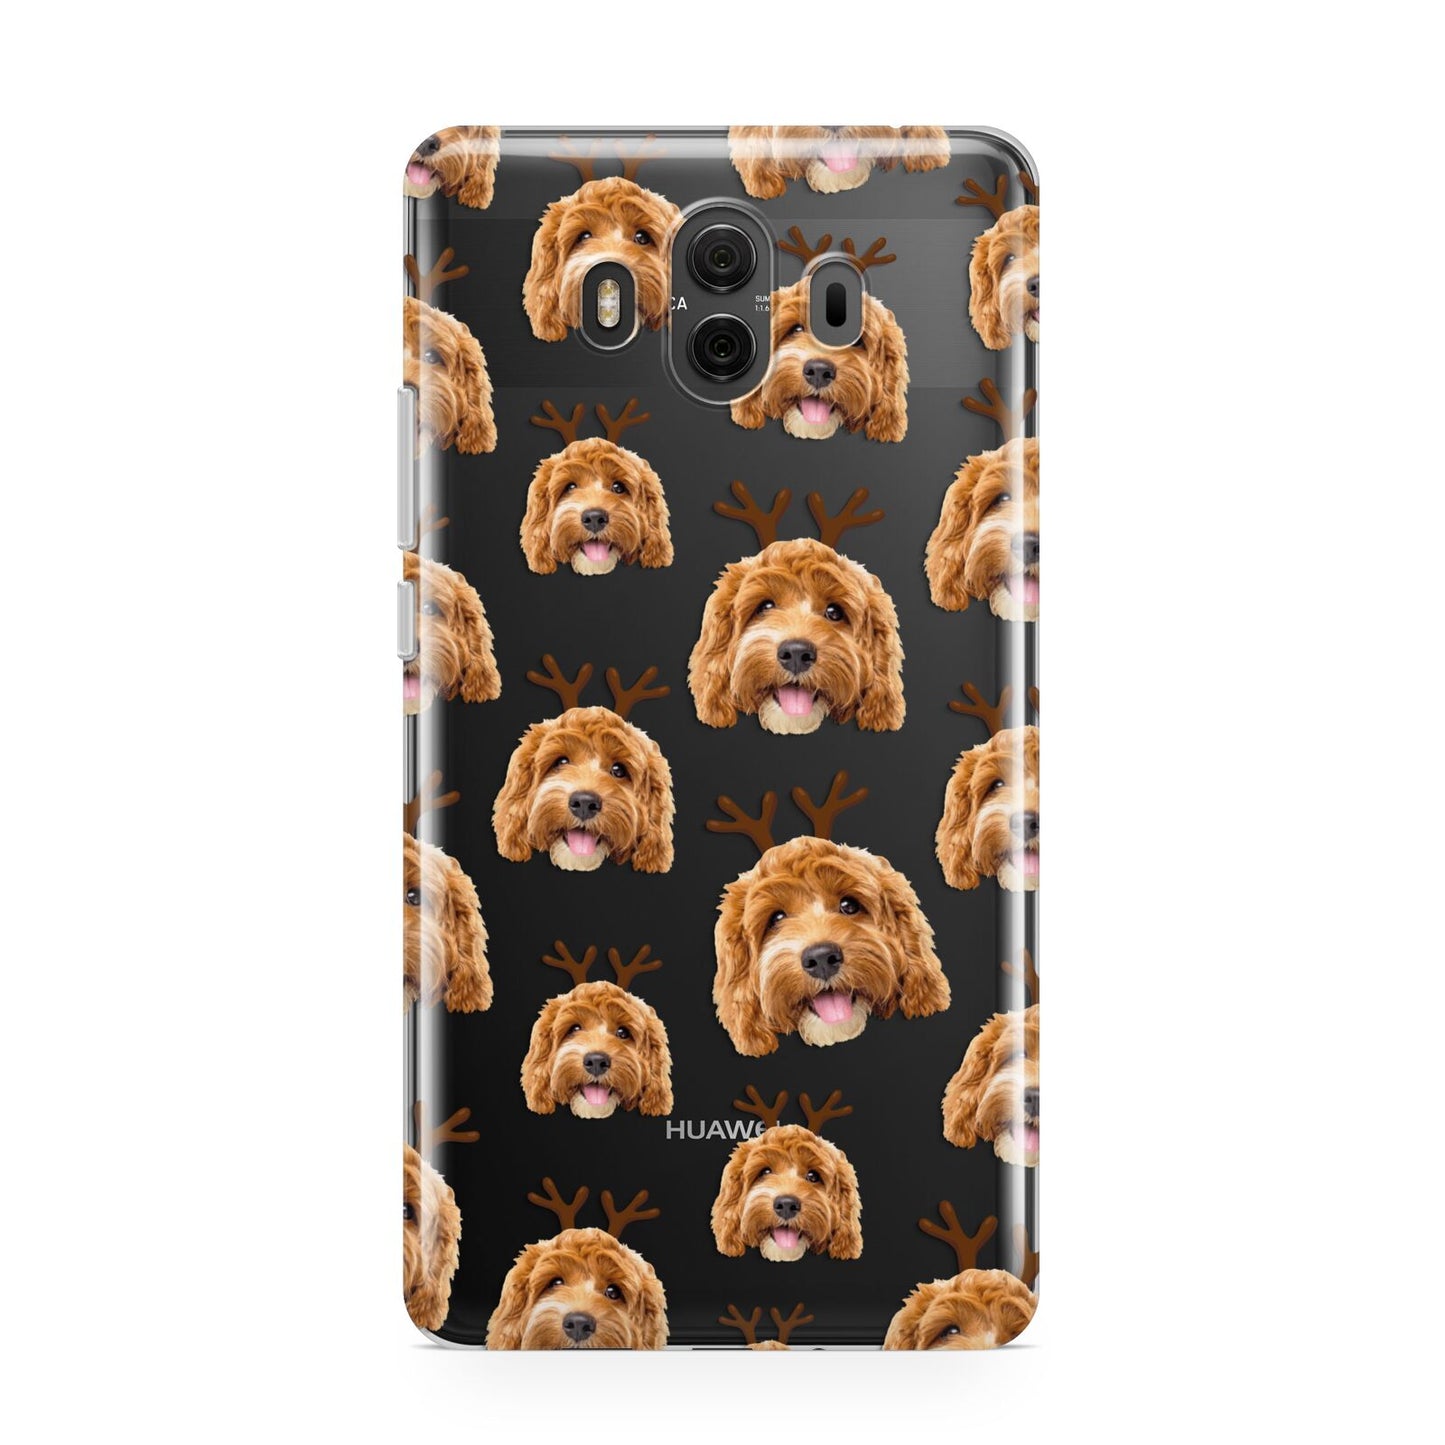 Personalised Christmas Dog Antler Huawei Mate 10 Protective Phone Case